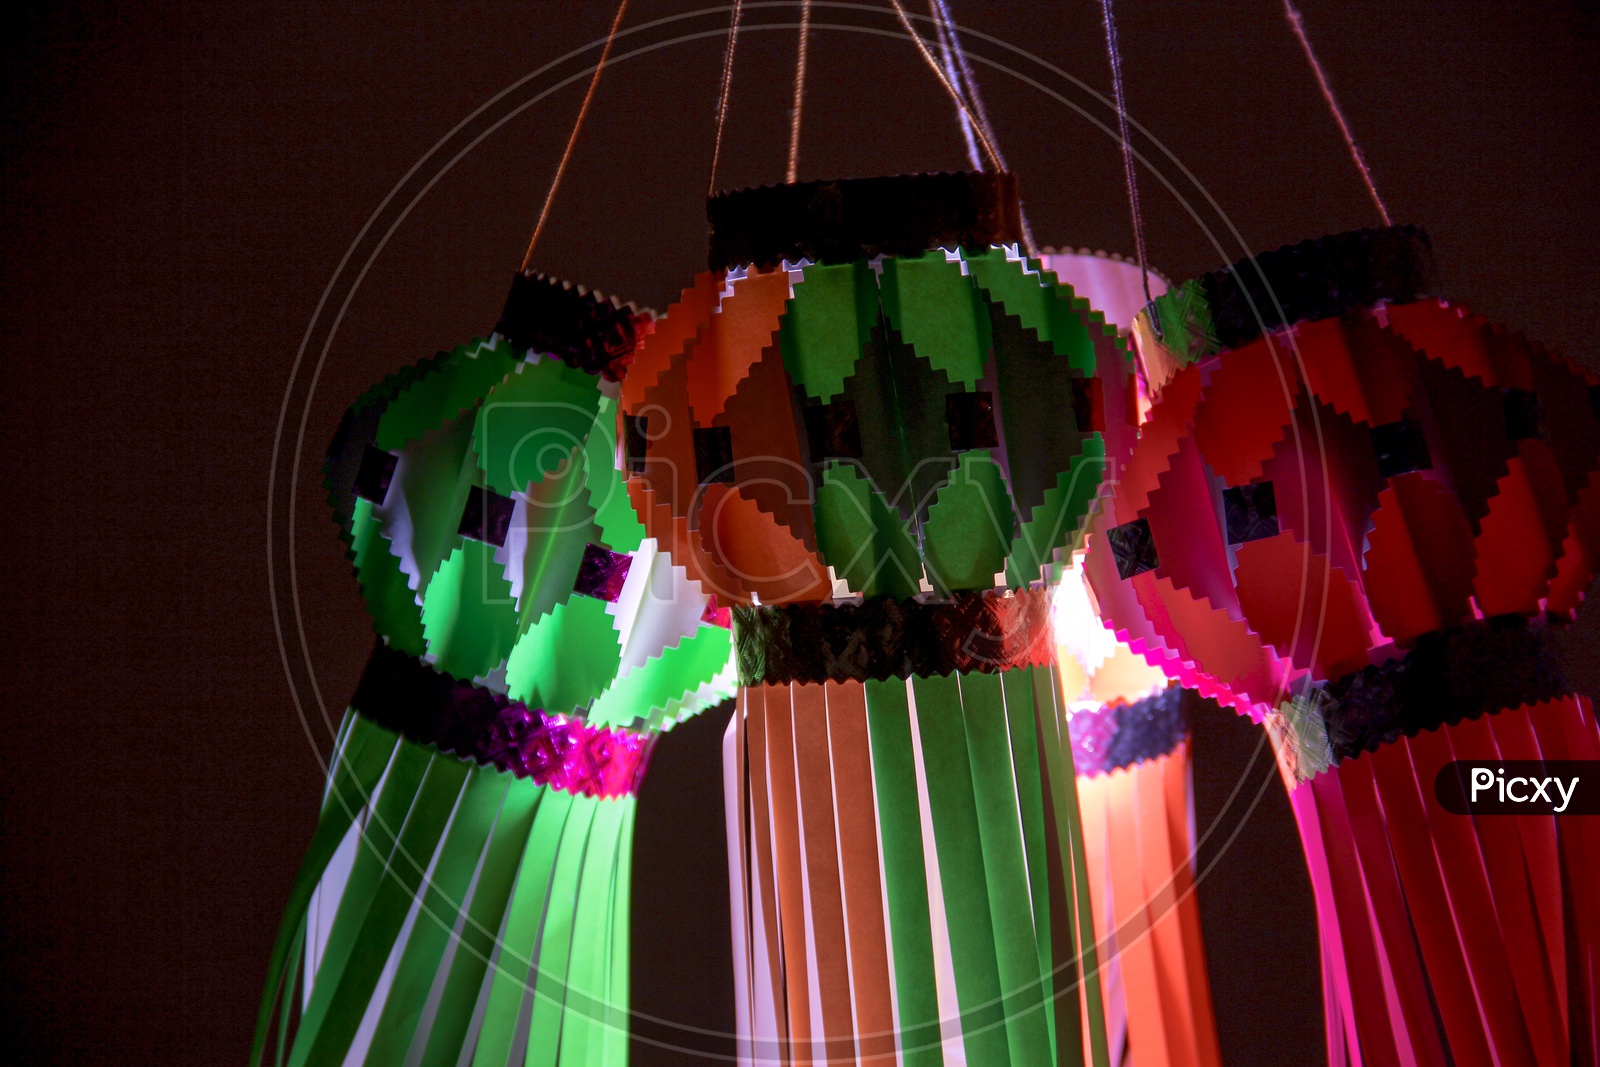 Hanging lanterns made out of paper with dark background